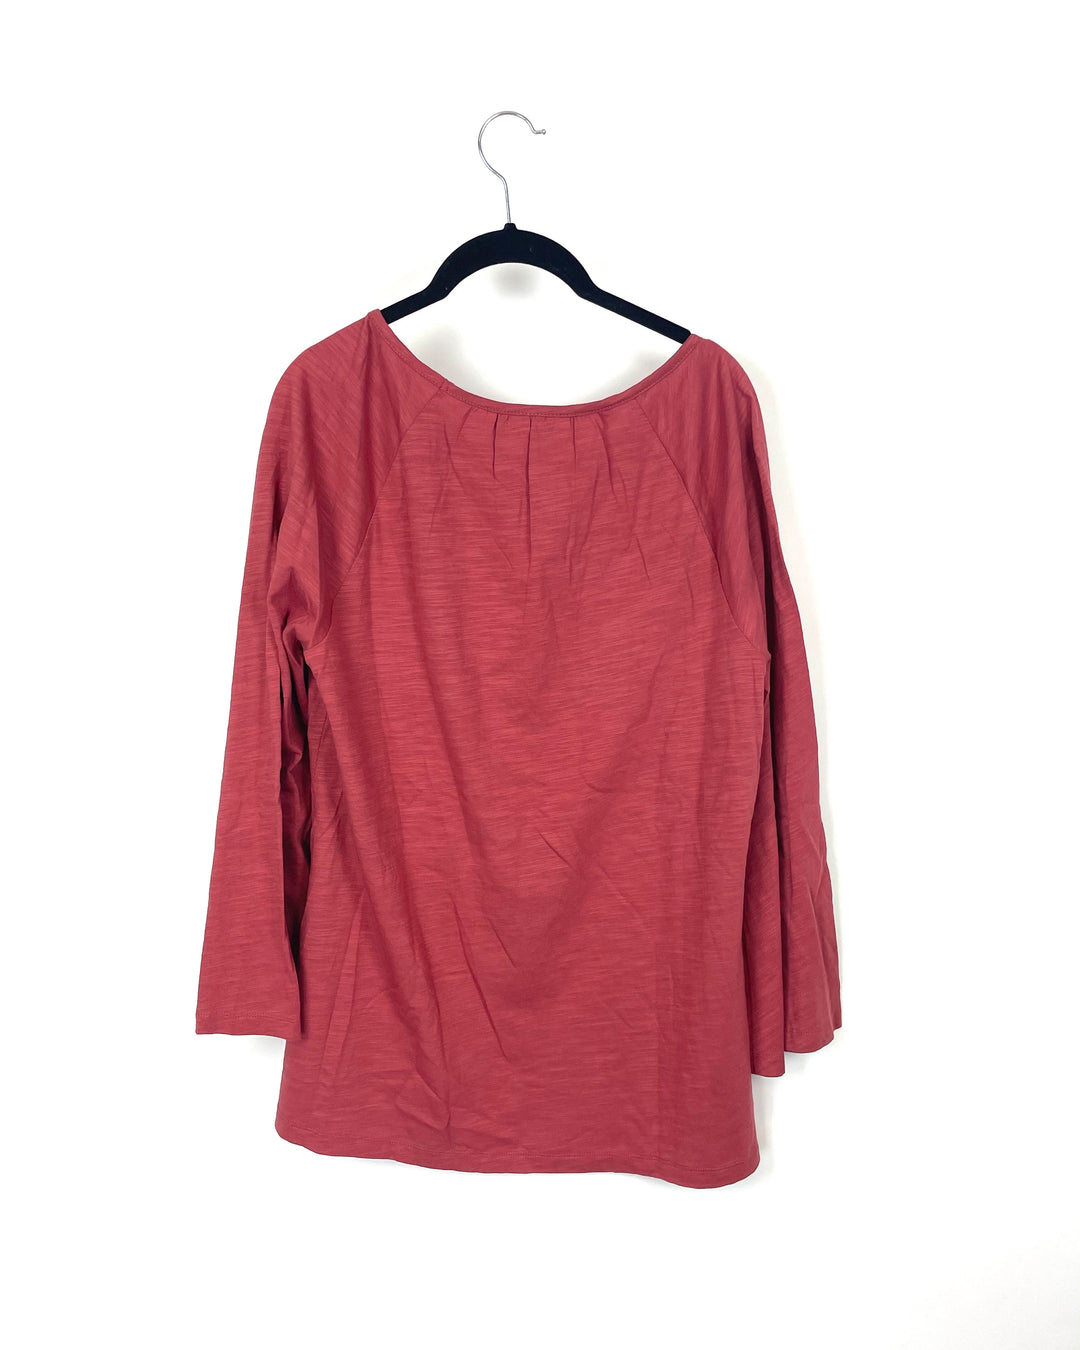 Dark Red Embroidered Long Sleeve Top - Small/Medium, Large/Extra-Large